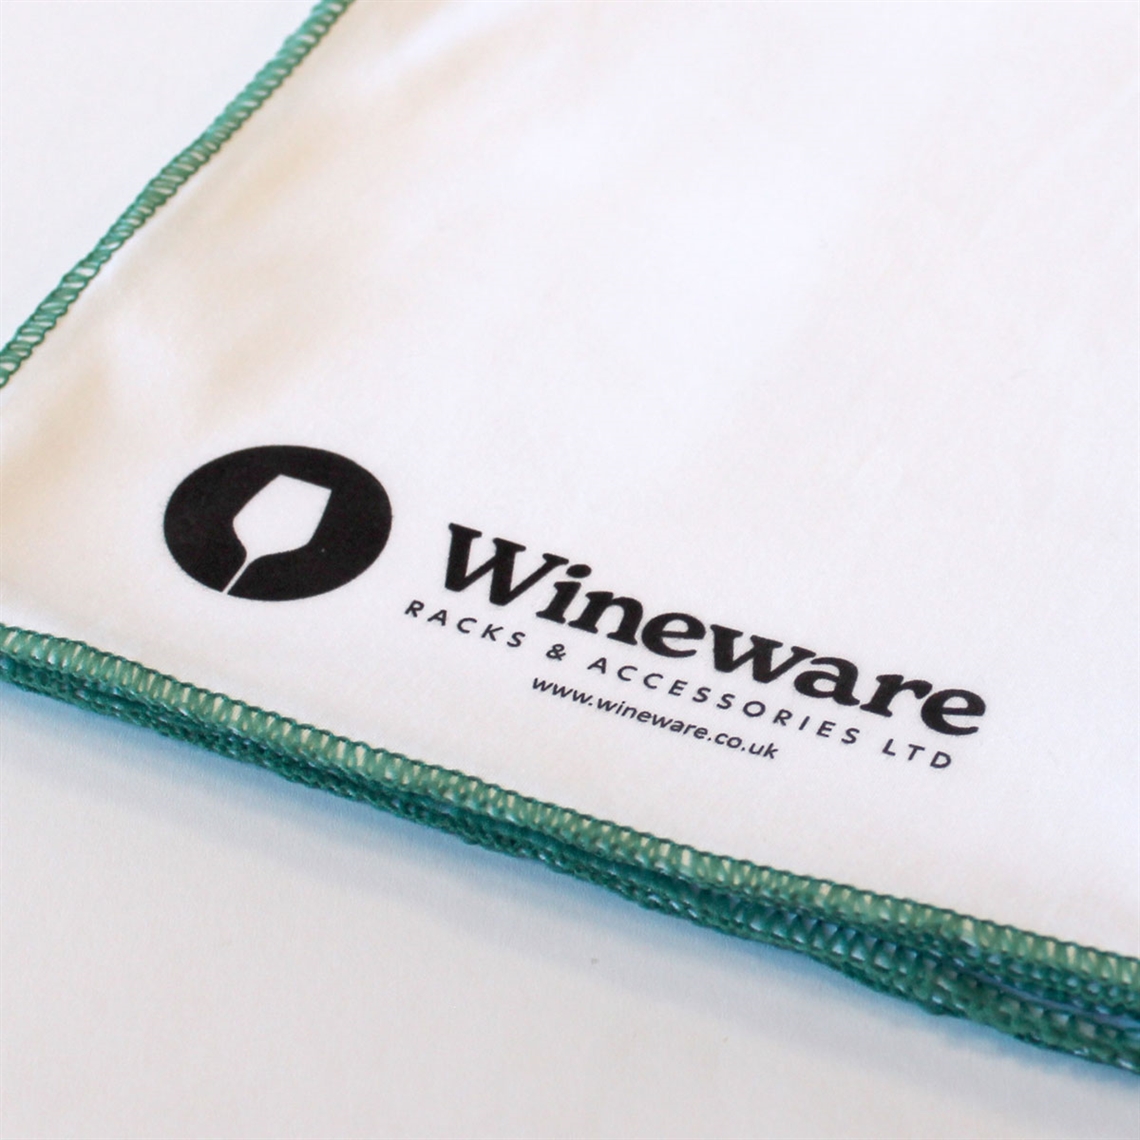 View more fortissimo from our Wine Glass Cleaning & Accessories range